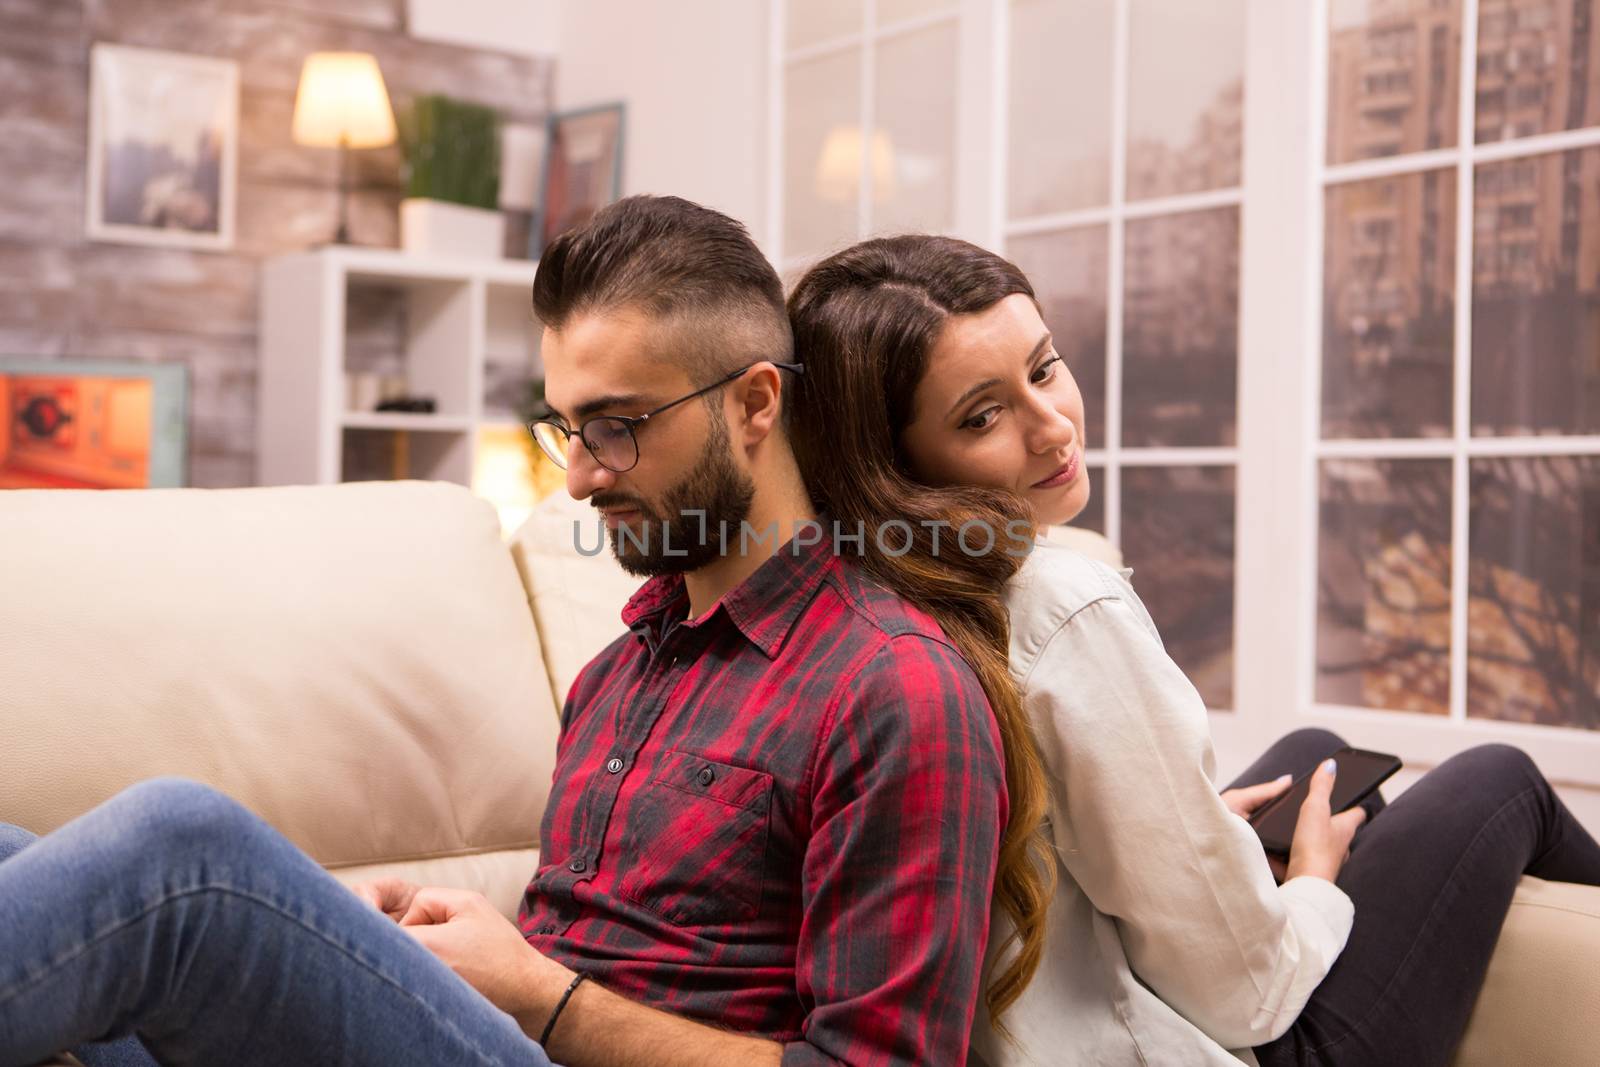 Girlfriend looking at her boyfriend while sitting back to back on sofa after and disagreement. Boyfriend ignoring girlfriend.